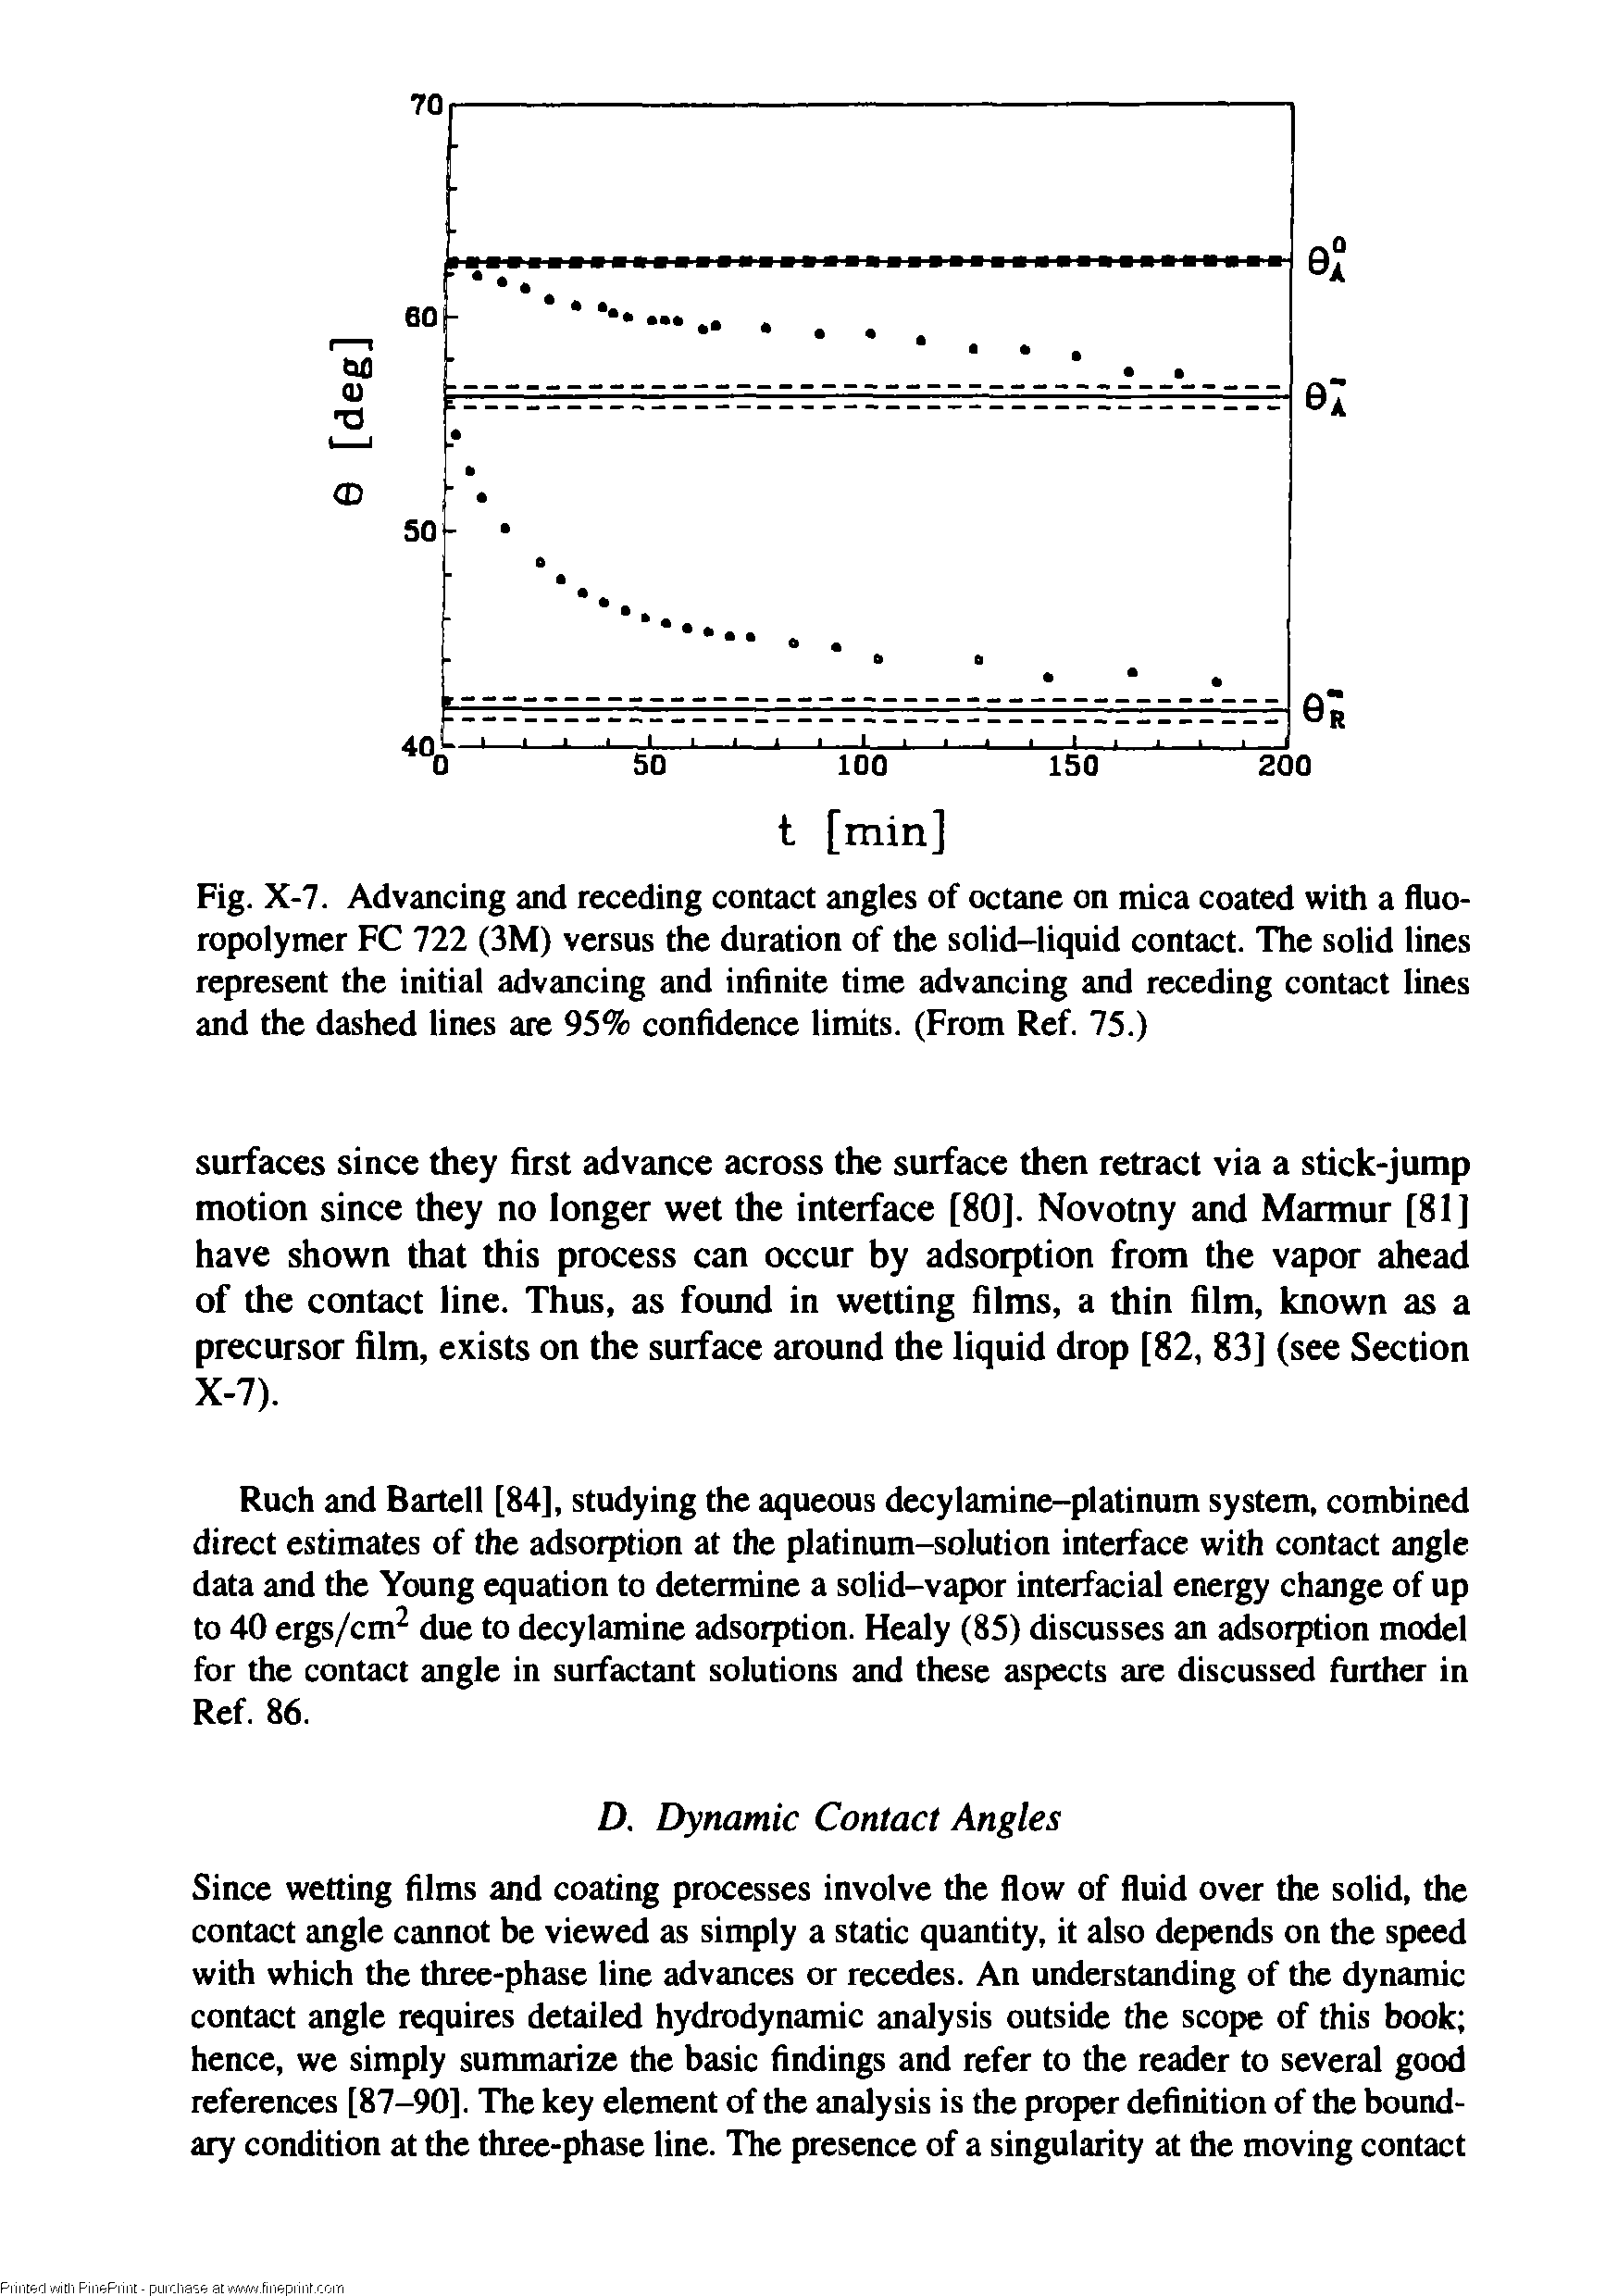 Fig. X-7. Advancing and receding contact angles of octane on mica coated with a fluo-ropolymer FC 722 (3M) versus the duration of the solid-liquid contact. The solid lines represent the initial advancing and infinite time advancing and receding contact lines and the dashed lines are 95% confidence limits. (From Ref. 75.)...